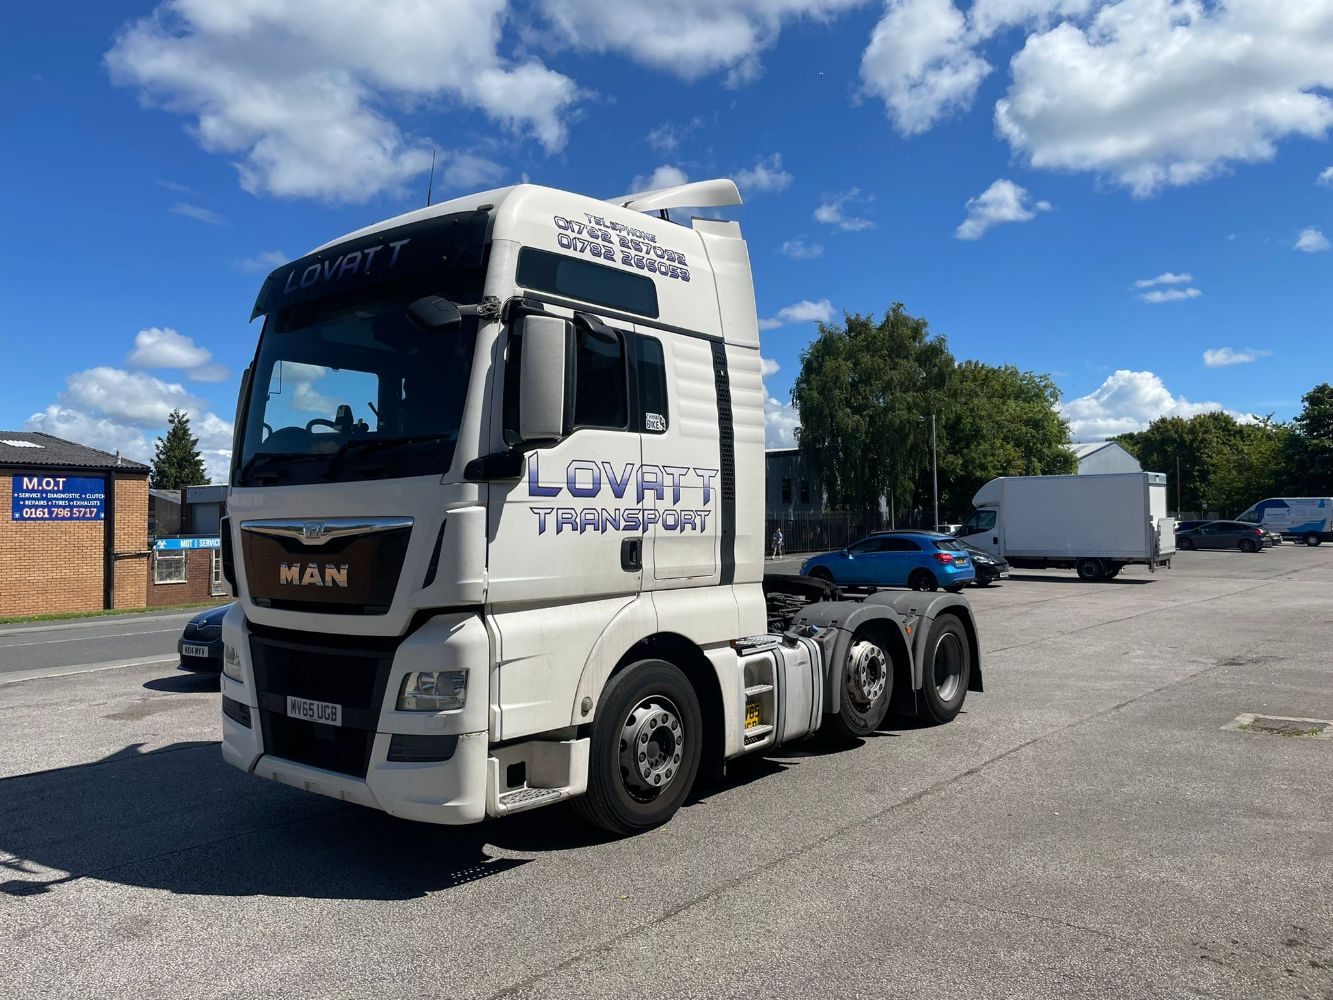 ONLINE AUCTION | Fleet of MAN Tractor Units | 40ft Curtain Sided Trailers (Montracon, Lawrence David & M&G) | Garage Equipment